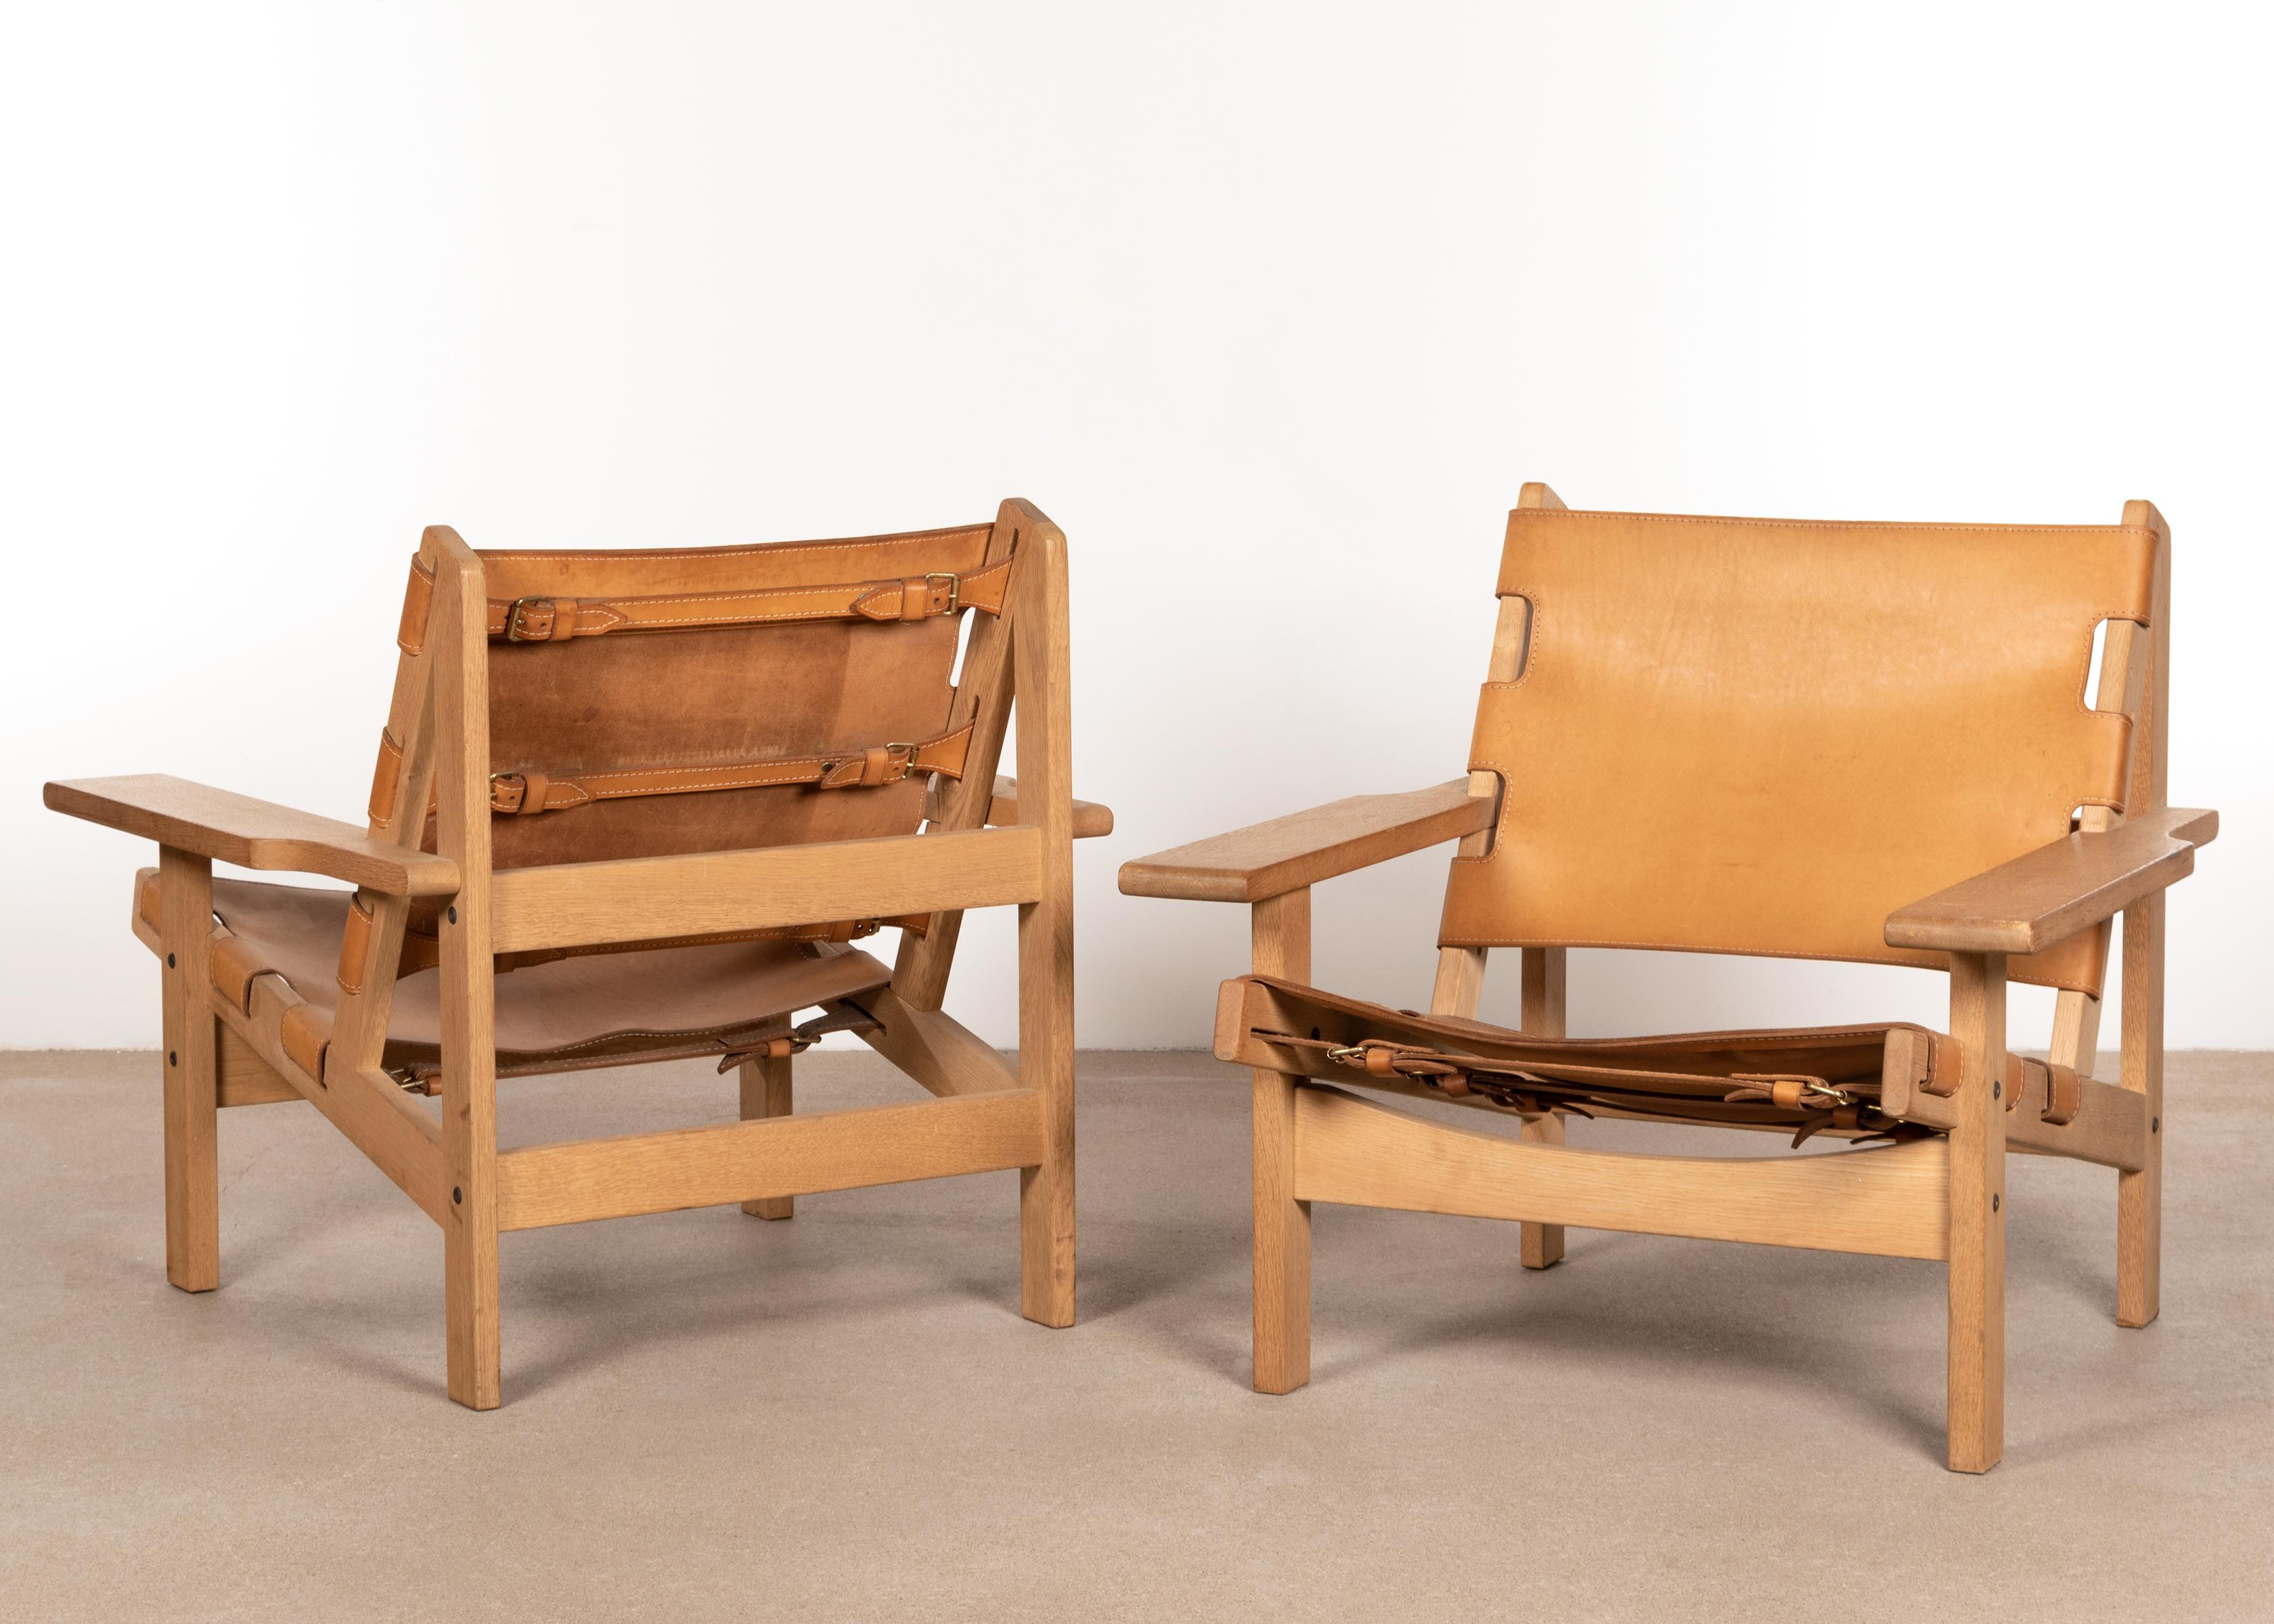 Great pair of hunting chairs (model 168) by Kurt Østervig for K. P. Jørgensens Møbelfabrik, Denmark. Solid oak frames with cognac saddle leather all in good / very good condition. Slight traces of use with beautiful aged leather. Reminiscent of